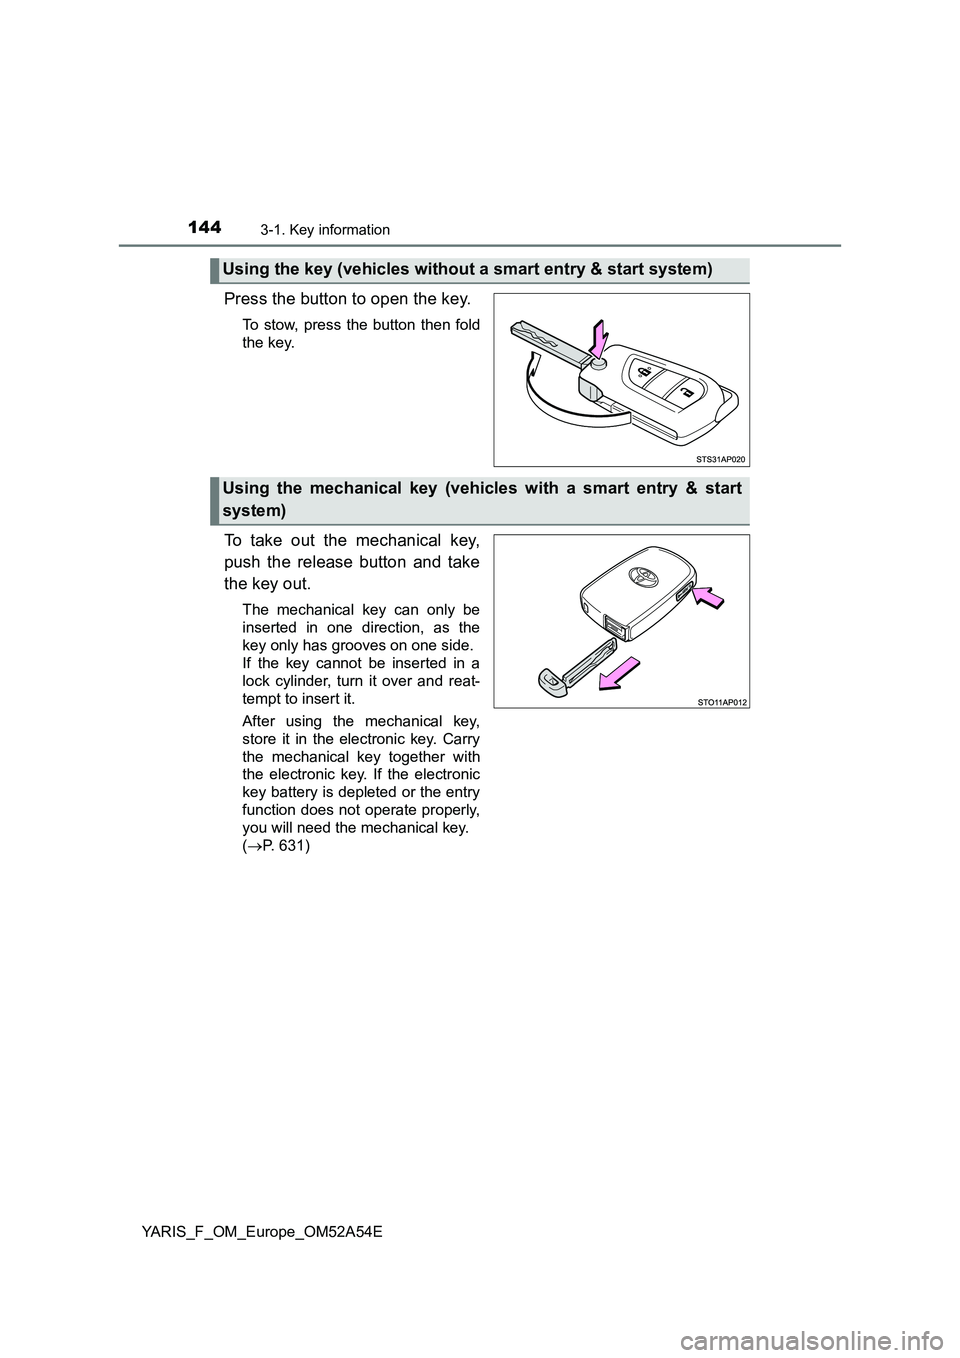 TOYOTA YARIS 2020  Owners Manual 1443-1. Key information
YARIS_F_OM_Europe_OM52A54E
Press the button to open the key.
To stow, press the button then fold 
the key.
To take out the mechanical key, 
push the release button and take 
th